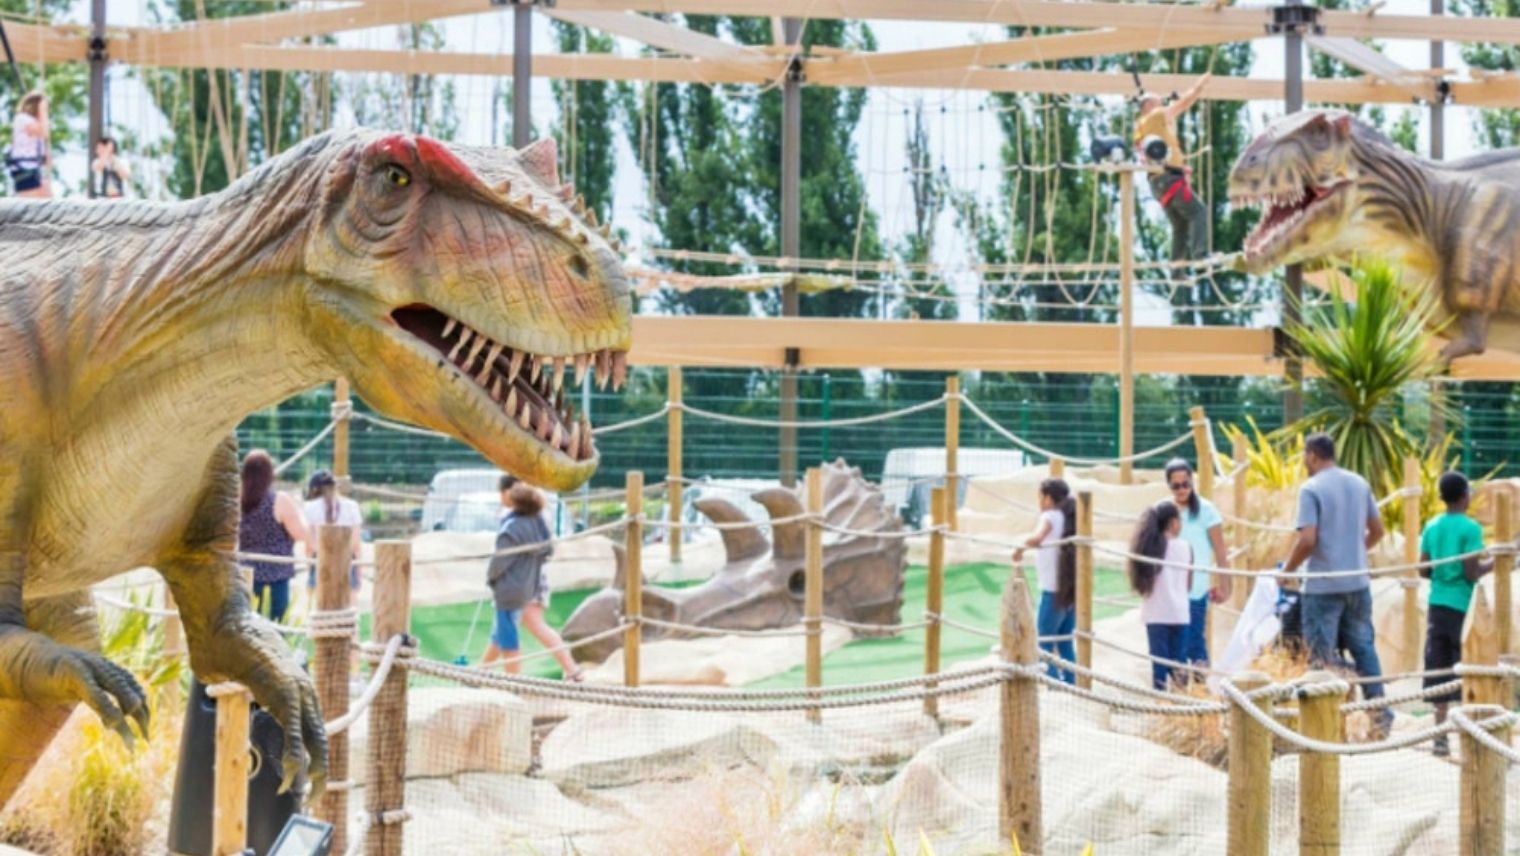 Dinosaurs at Jurassic Encounters crazy golf course